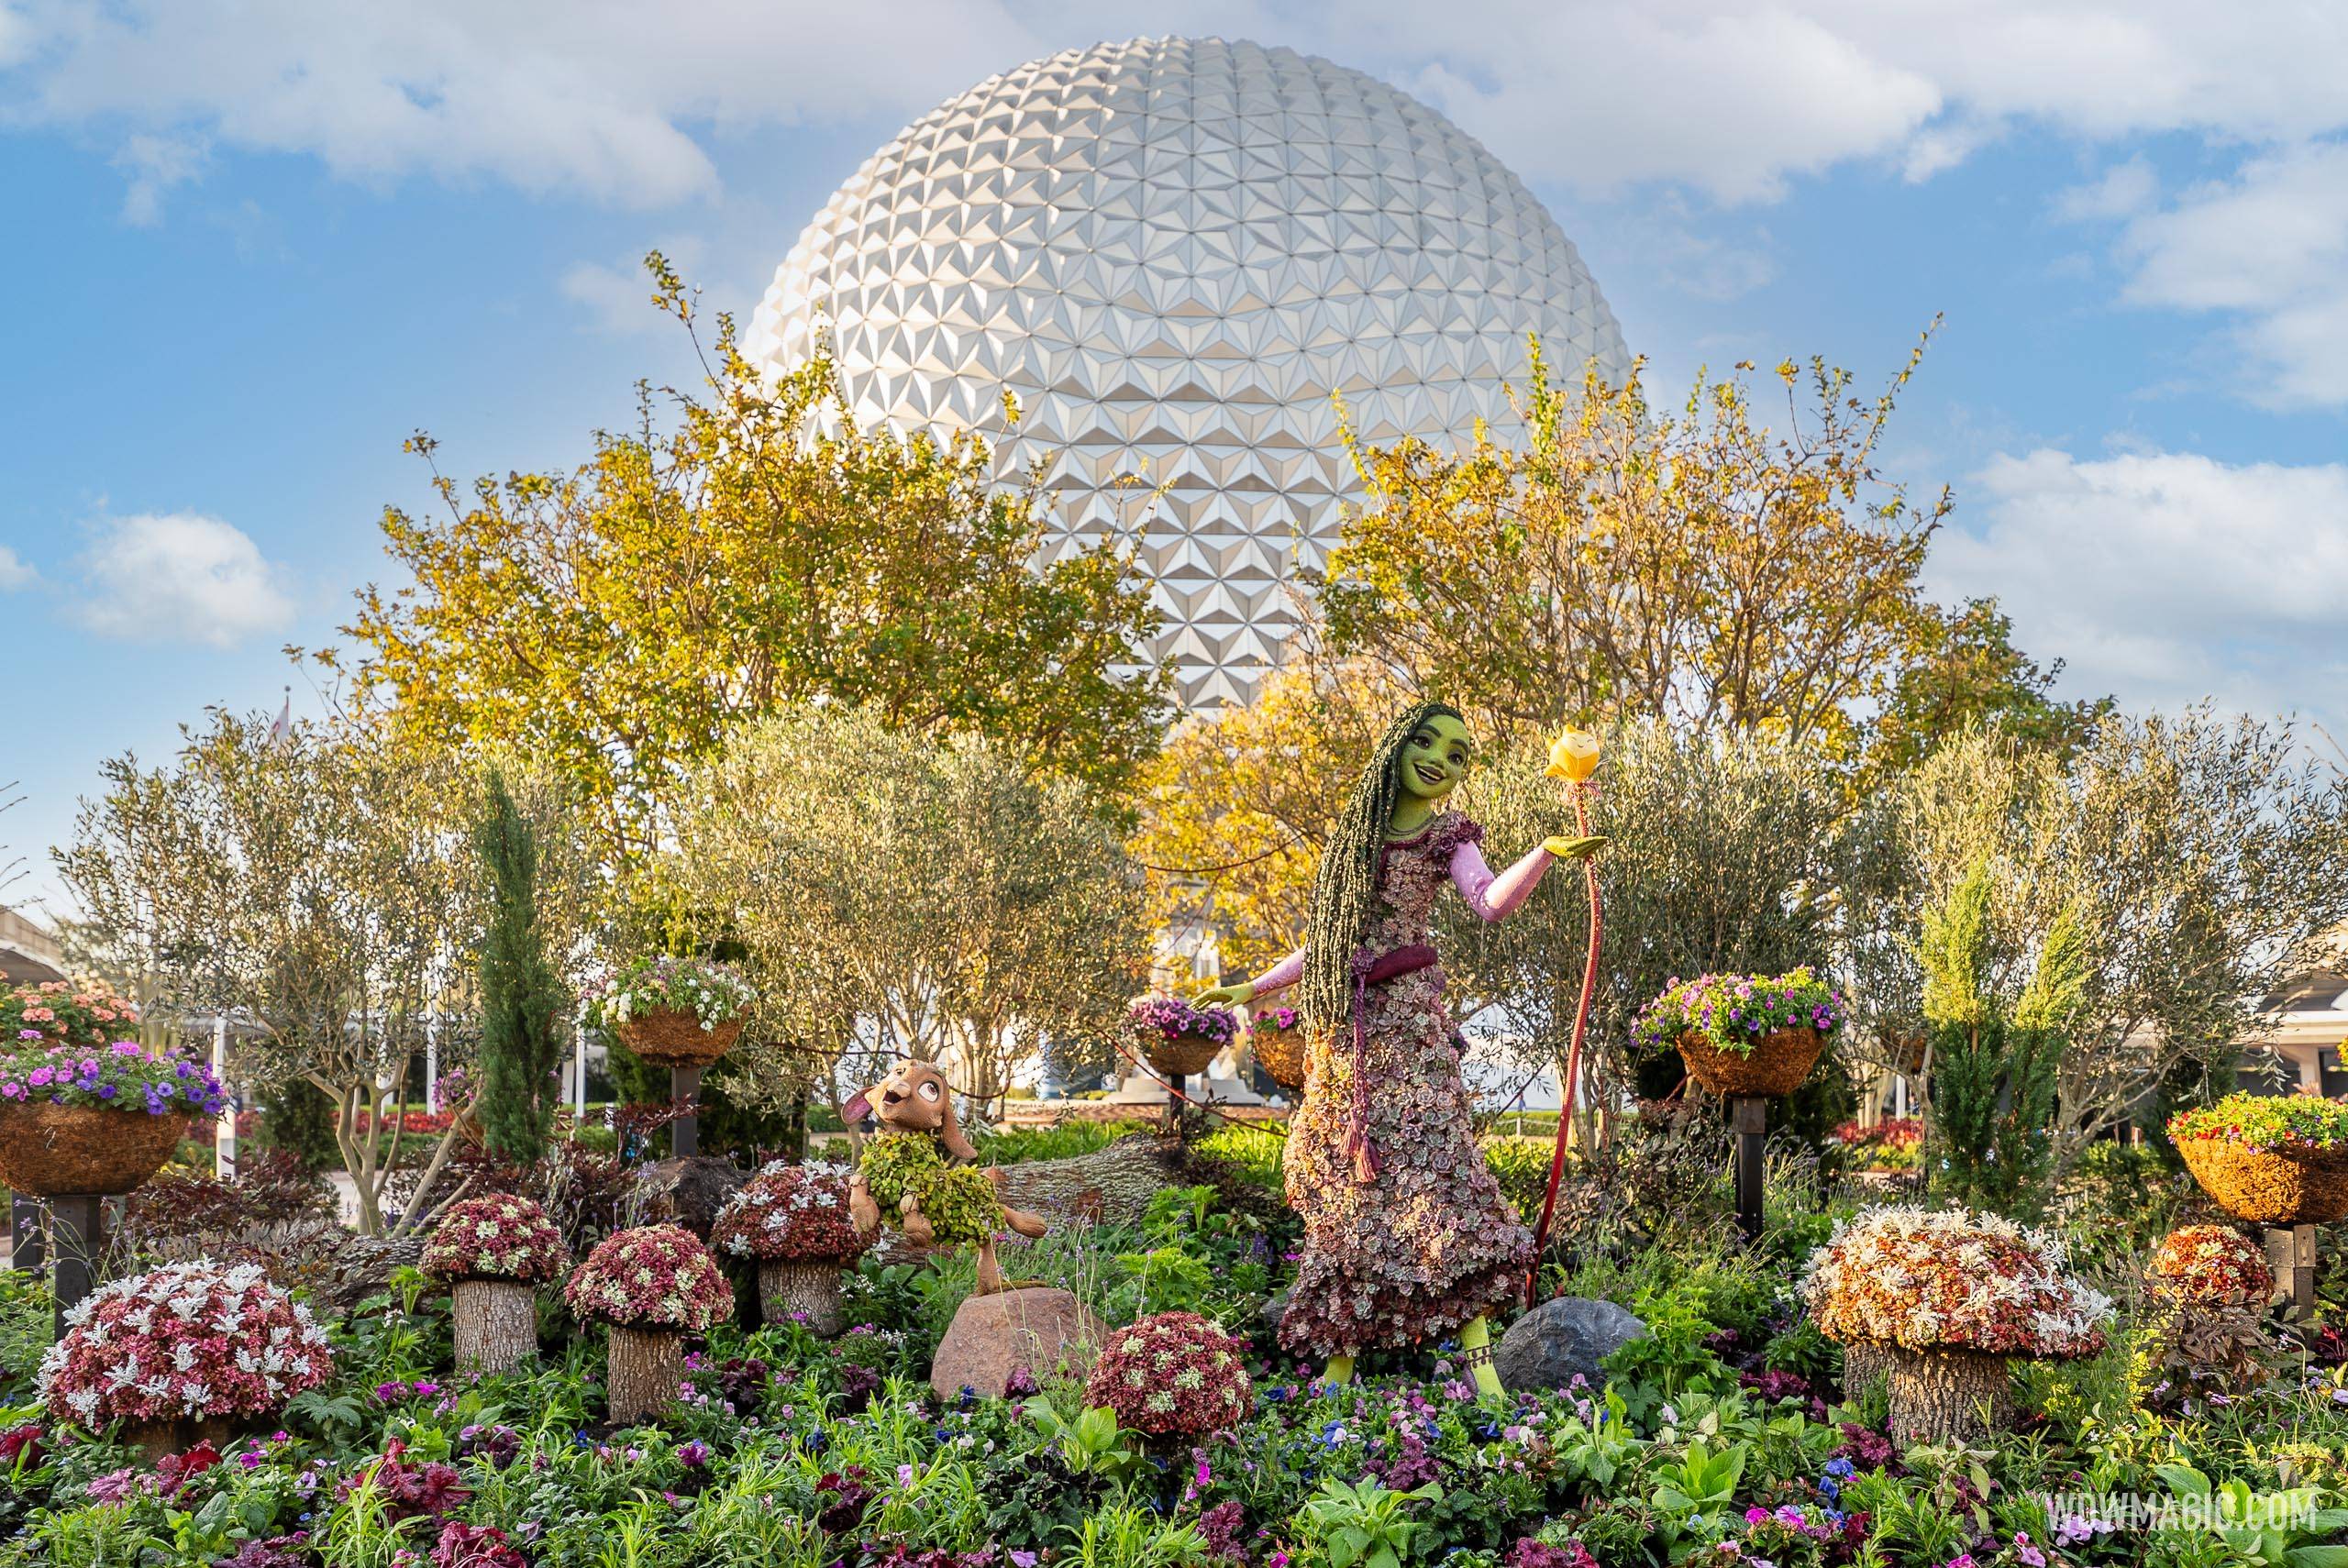 'Garden Rocks' acts announced for the 2018 Epcot International Flower and Garden Festival